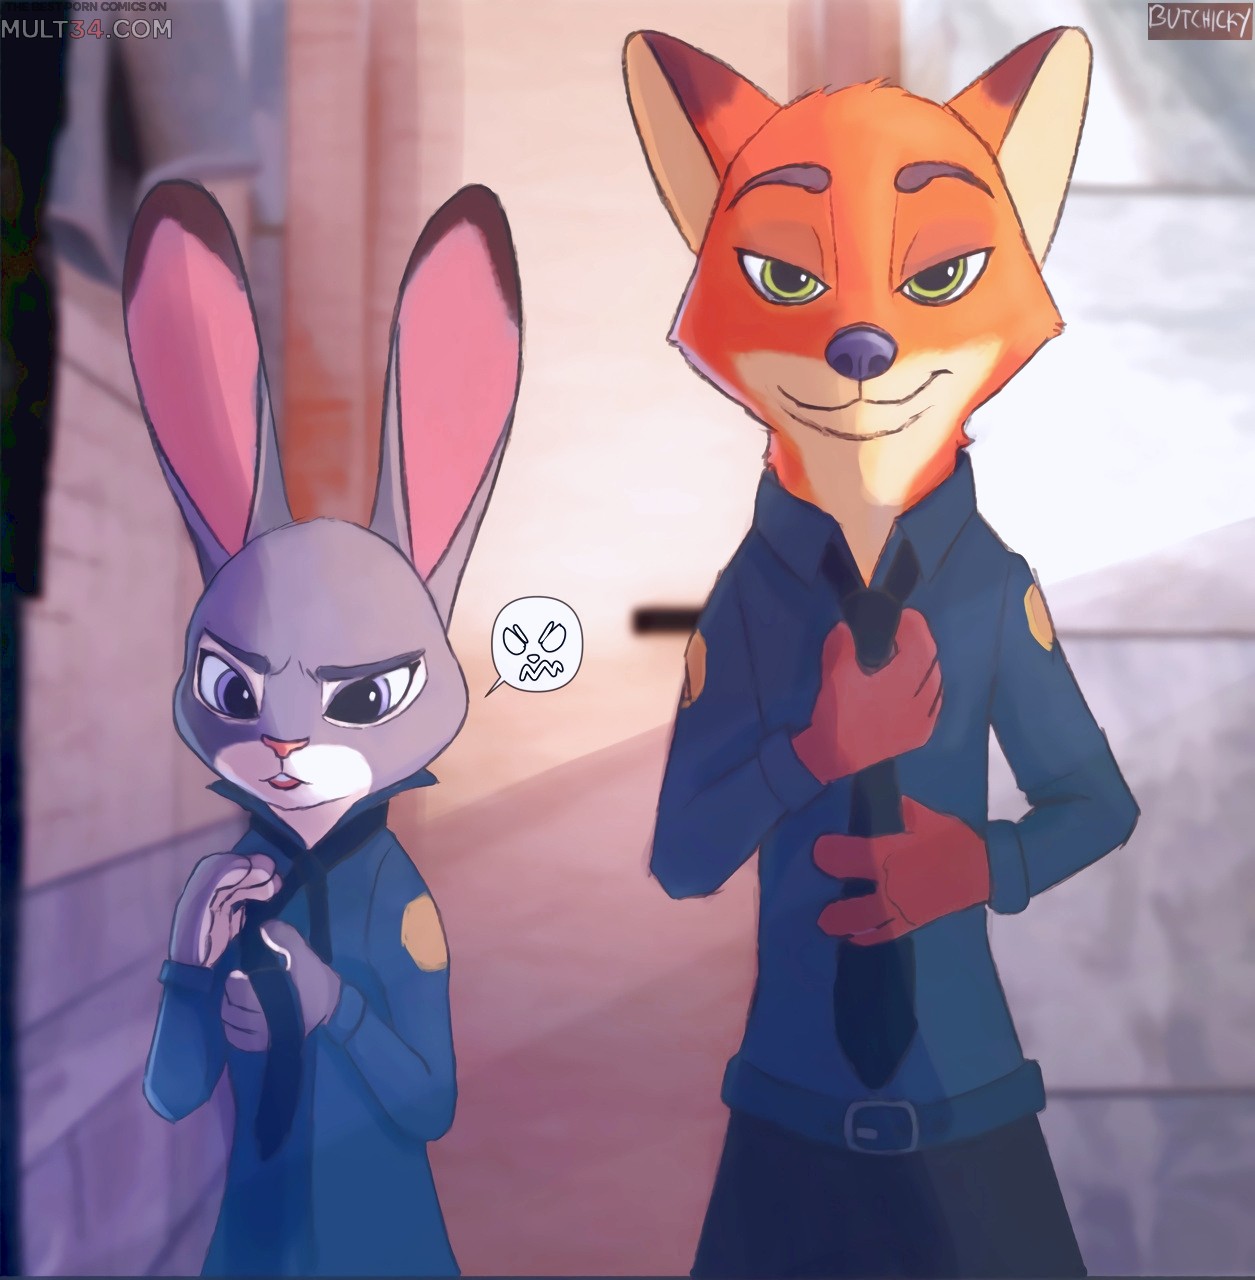 Under Arrest porn comic page 1 on category Zootopia